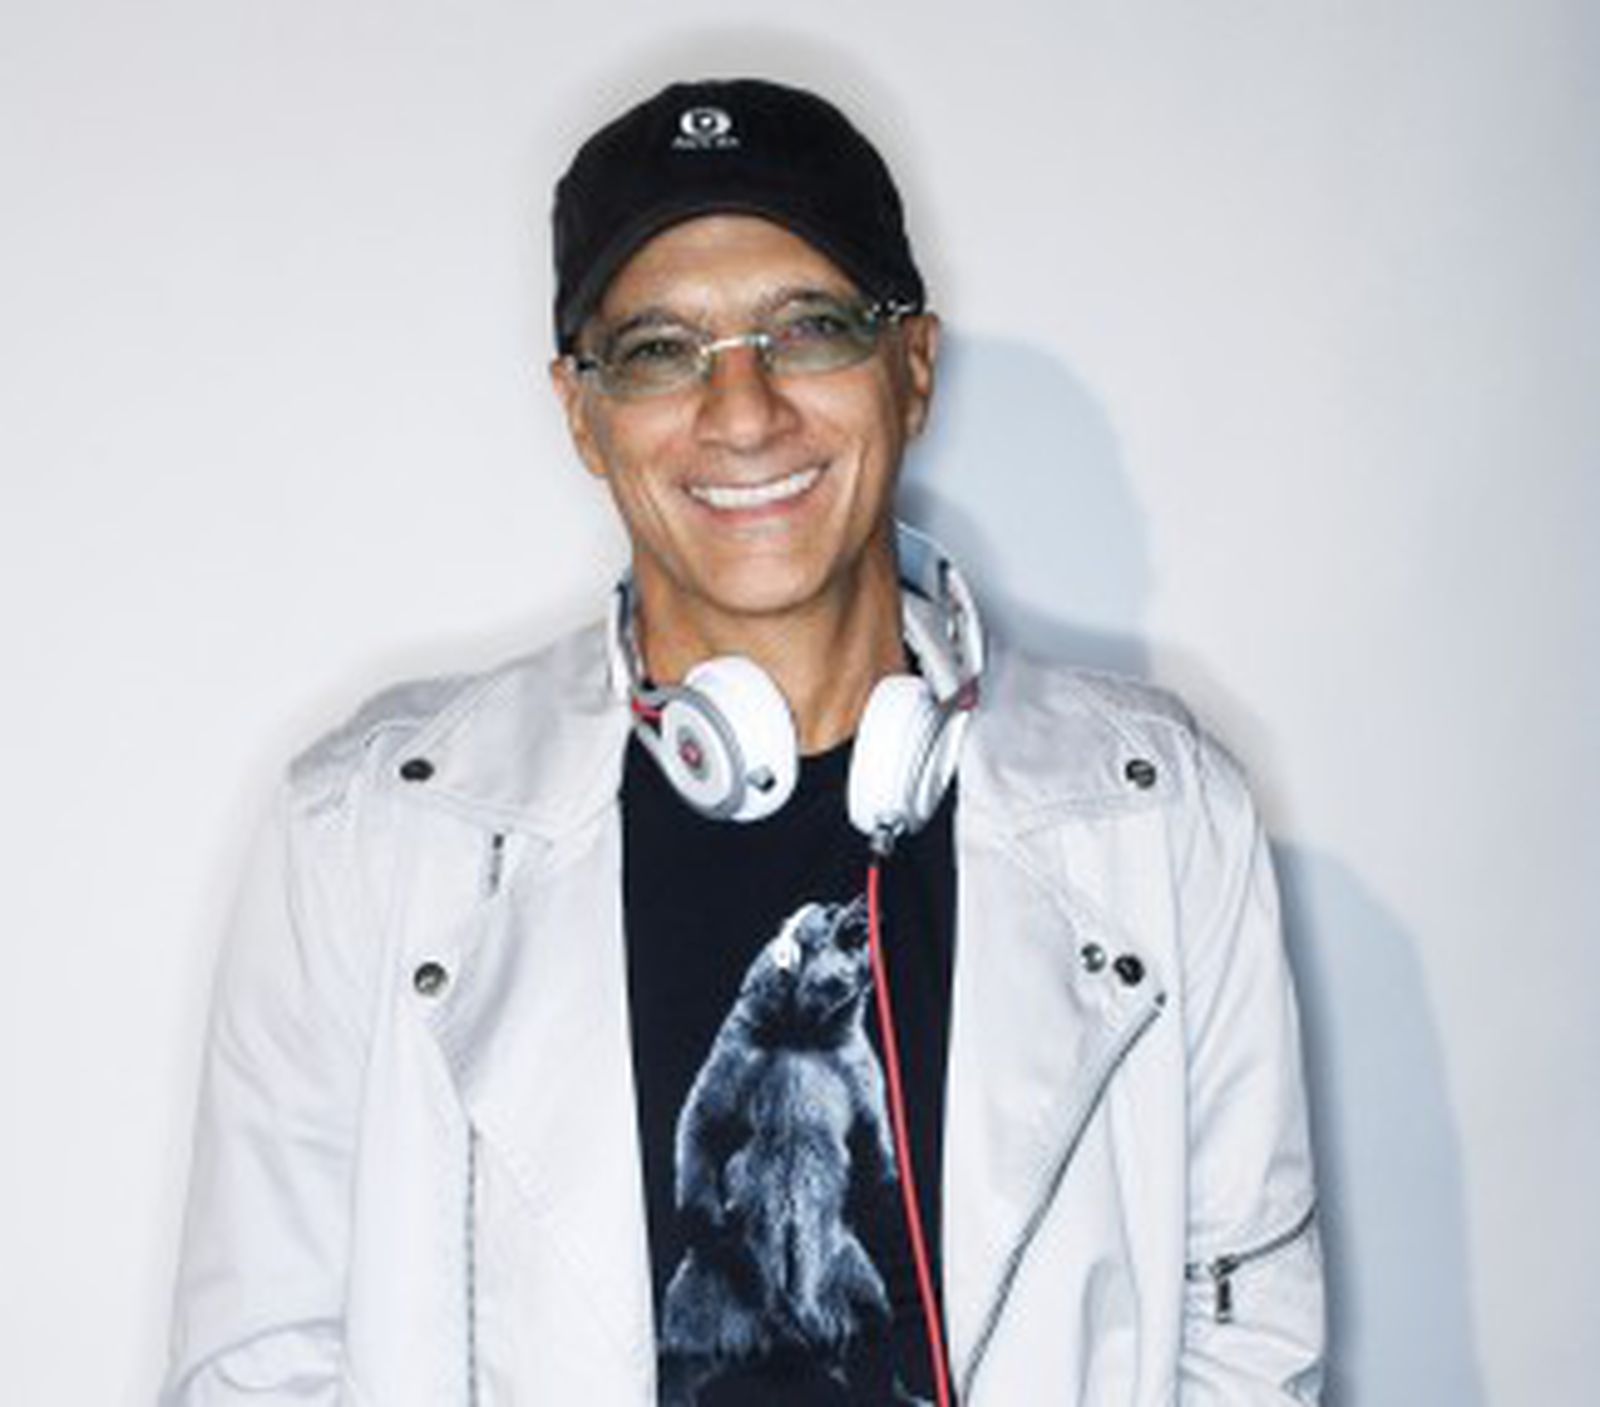 Beats CEO Jimmy Iovine Recently Met With Executives About His Subscription Music Service -